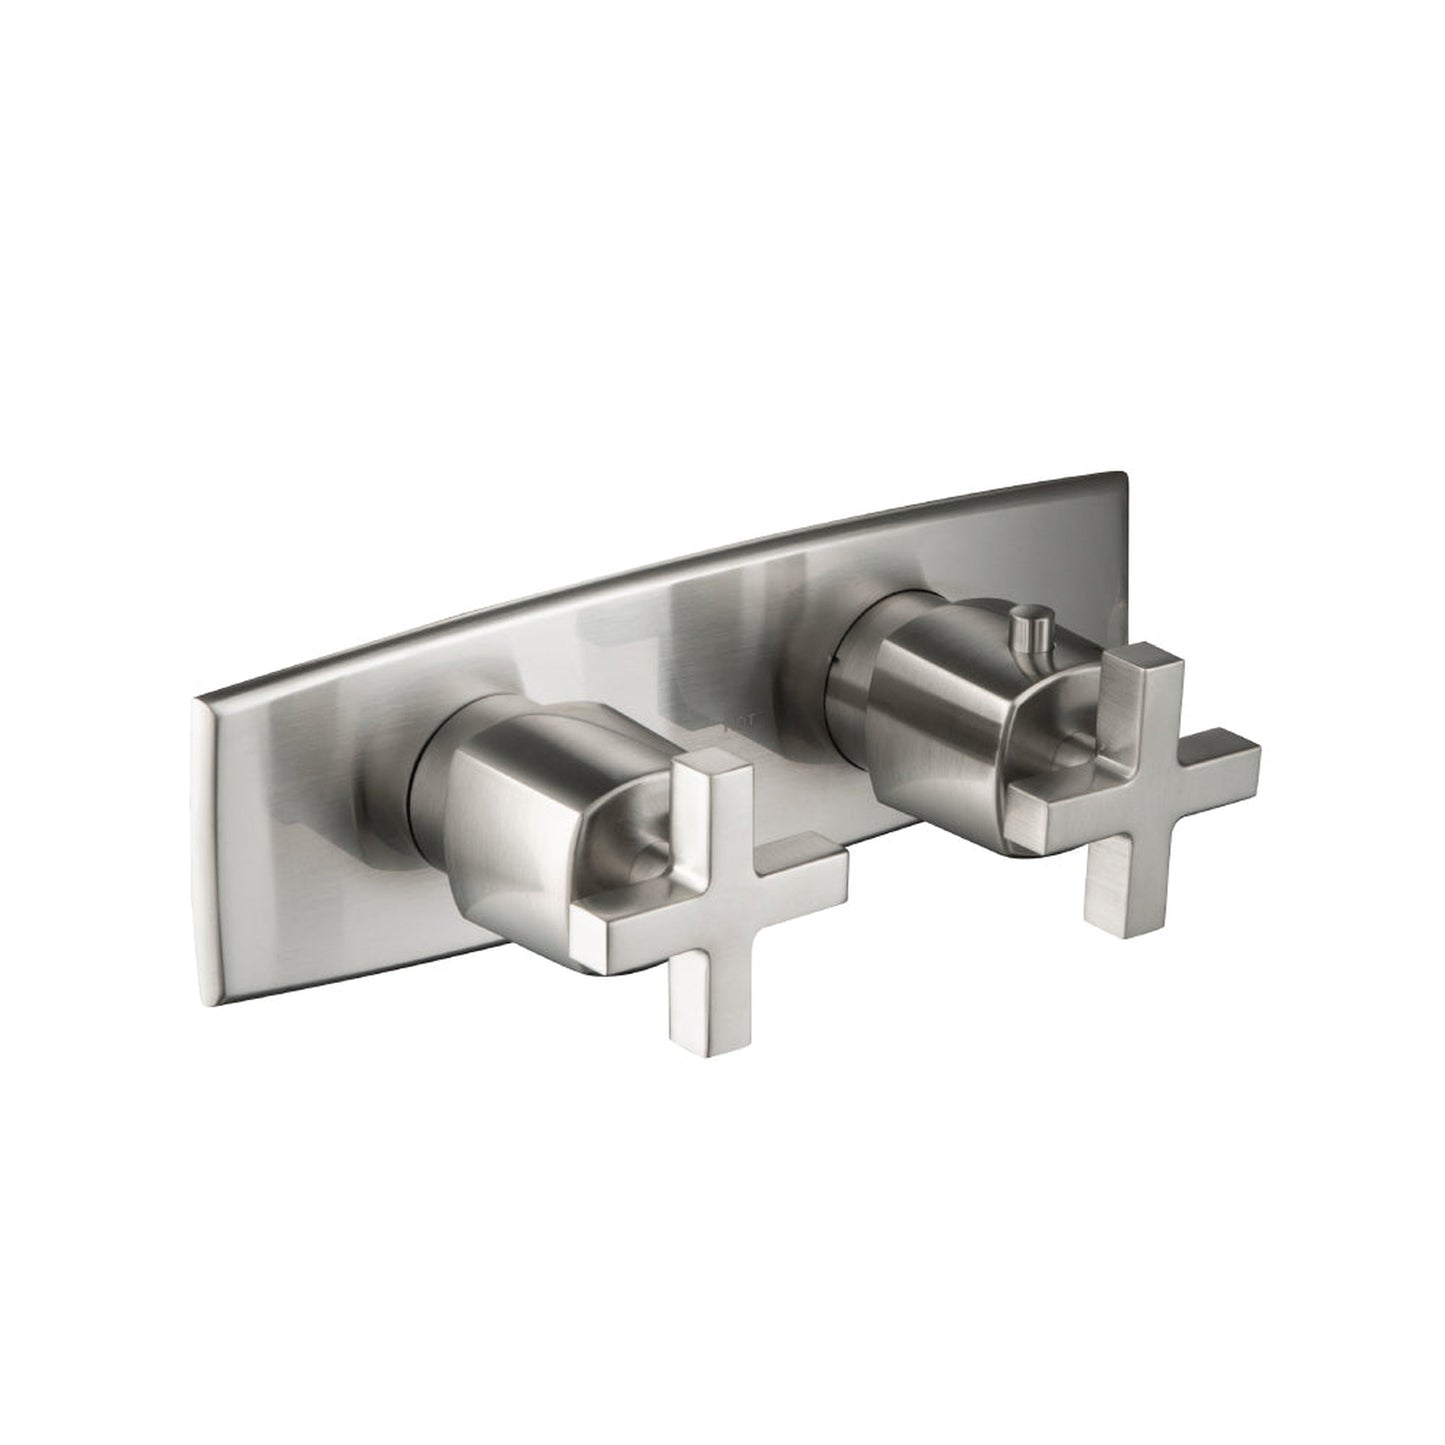 Isenberg Serie 240 Single Output Trim for Thermostatic Valve in Brushed Nickel